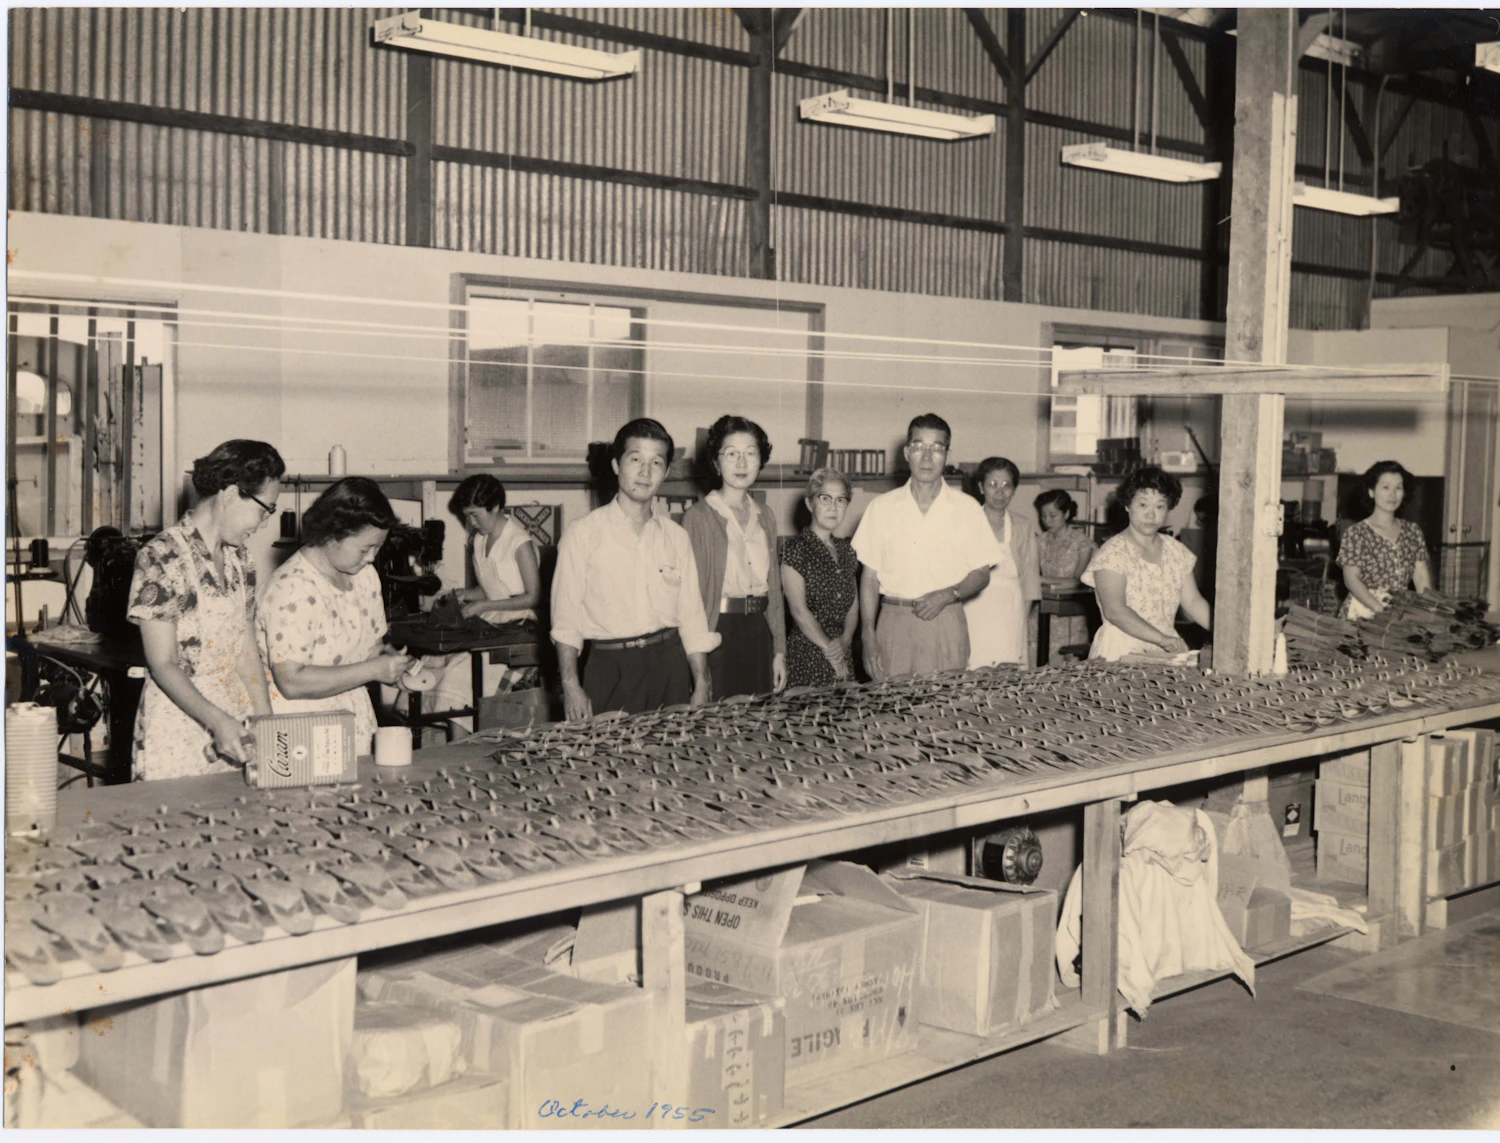 Staff at the factory during the early days of the brand. Motonaga can be seen in the middle.